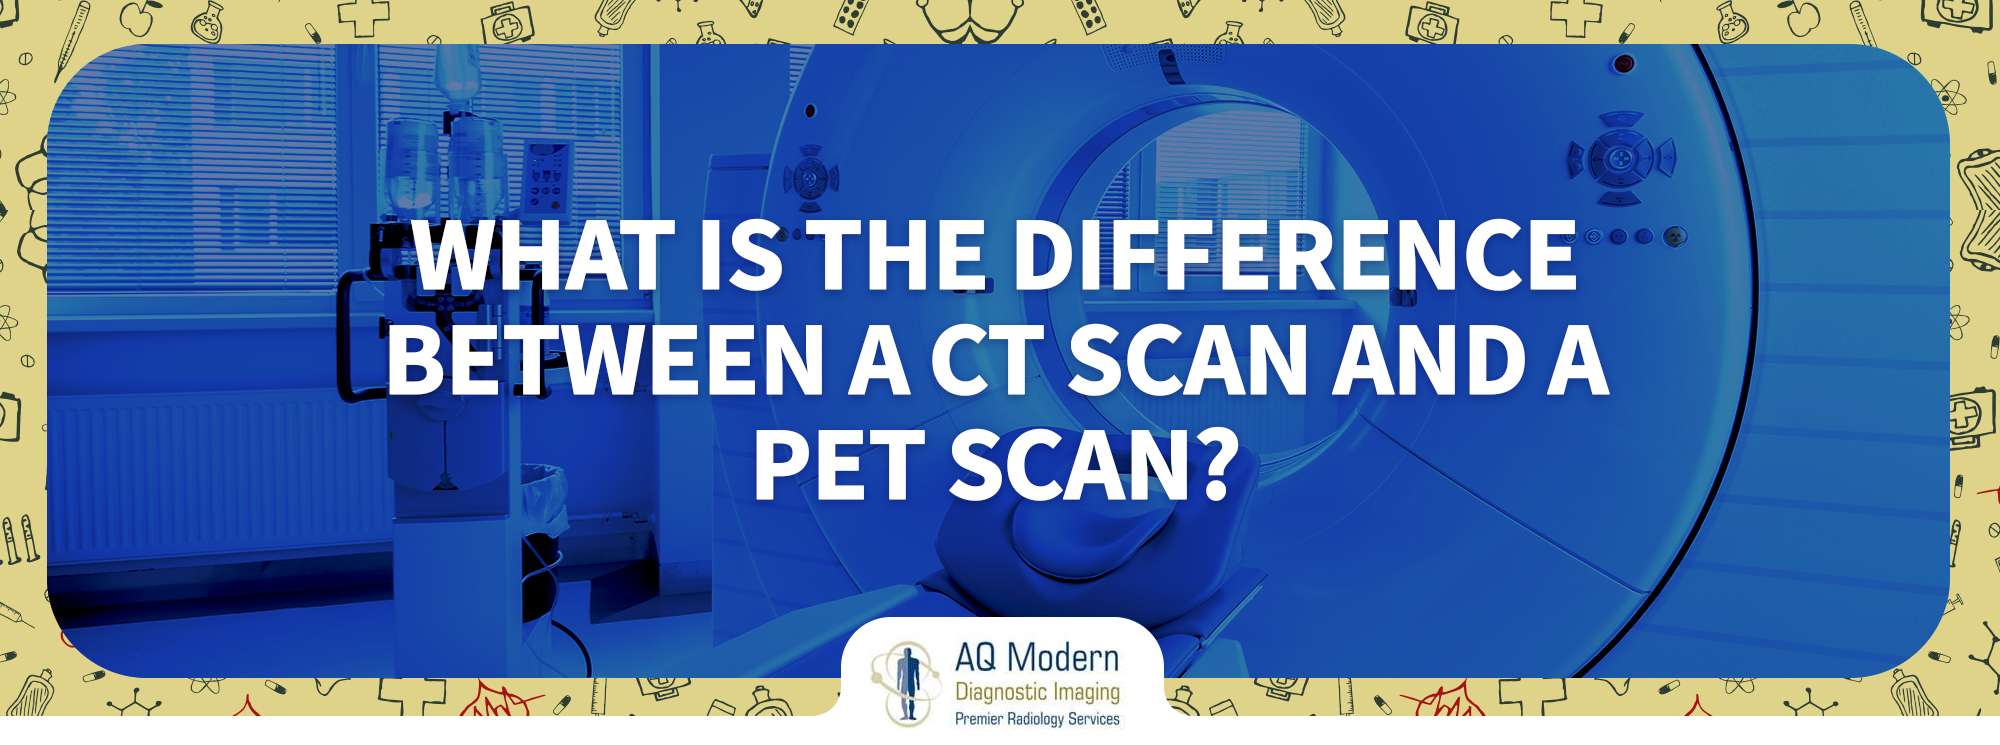 difference-between-ct-scan-and-pet-scan